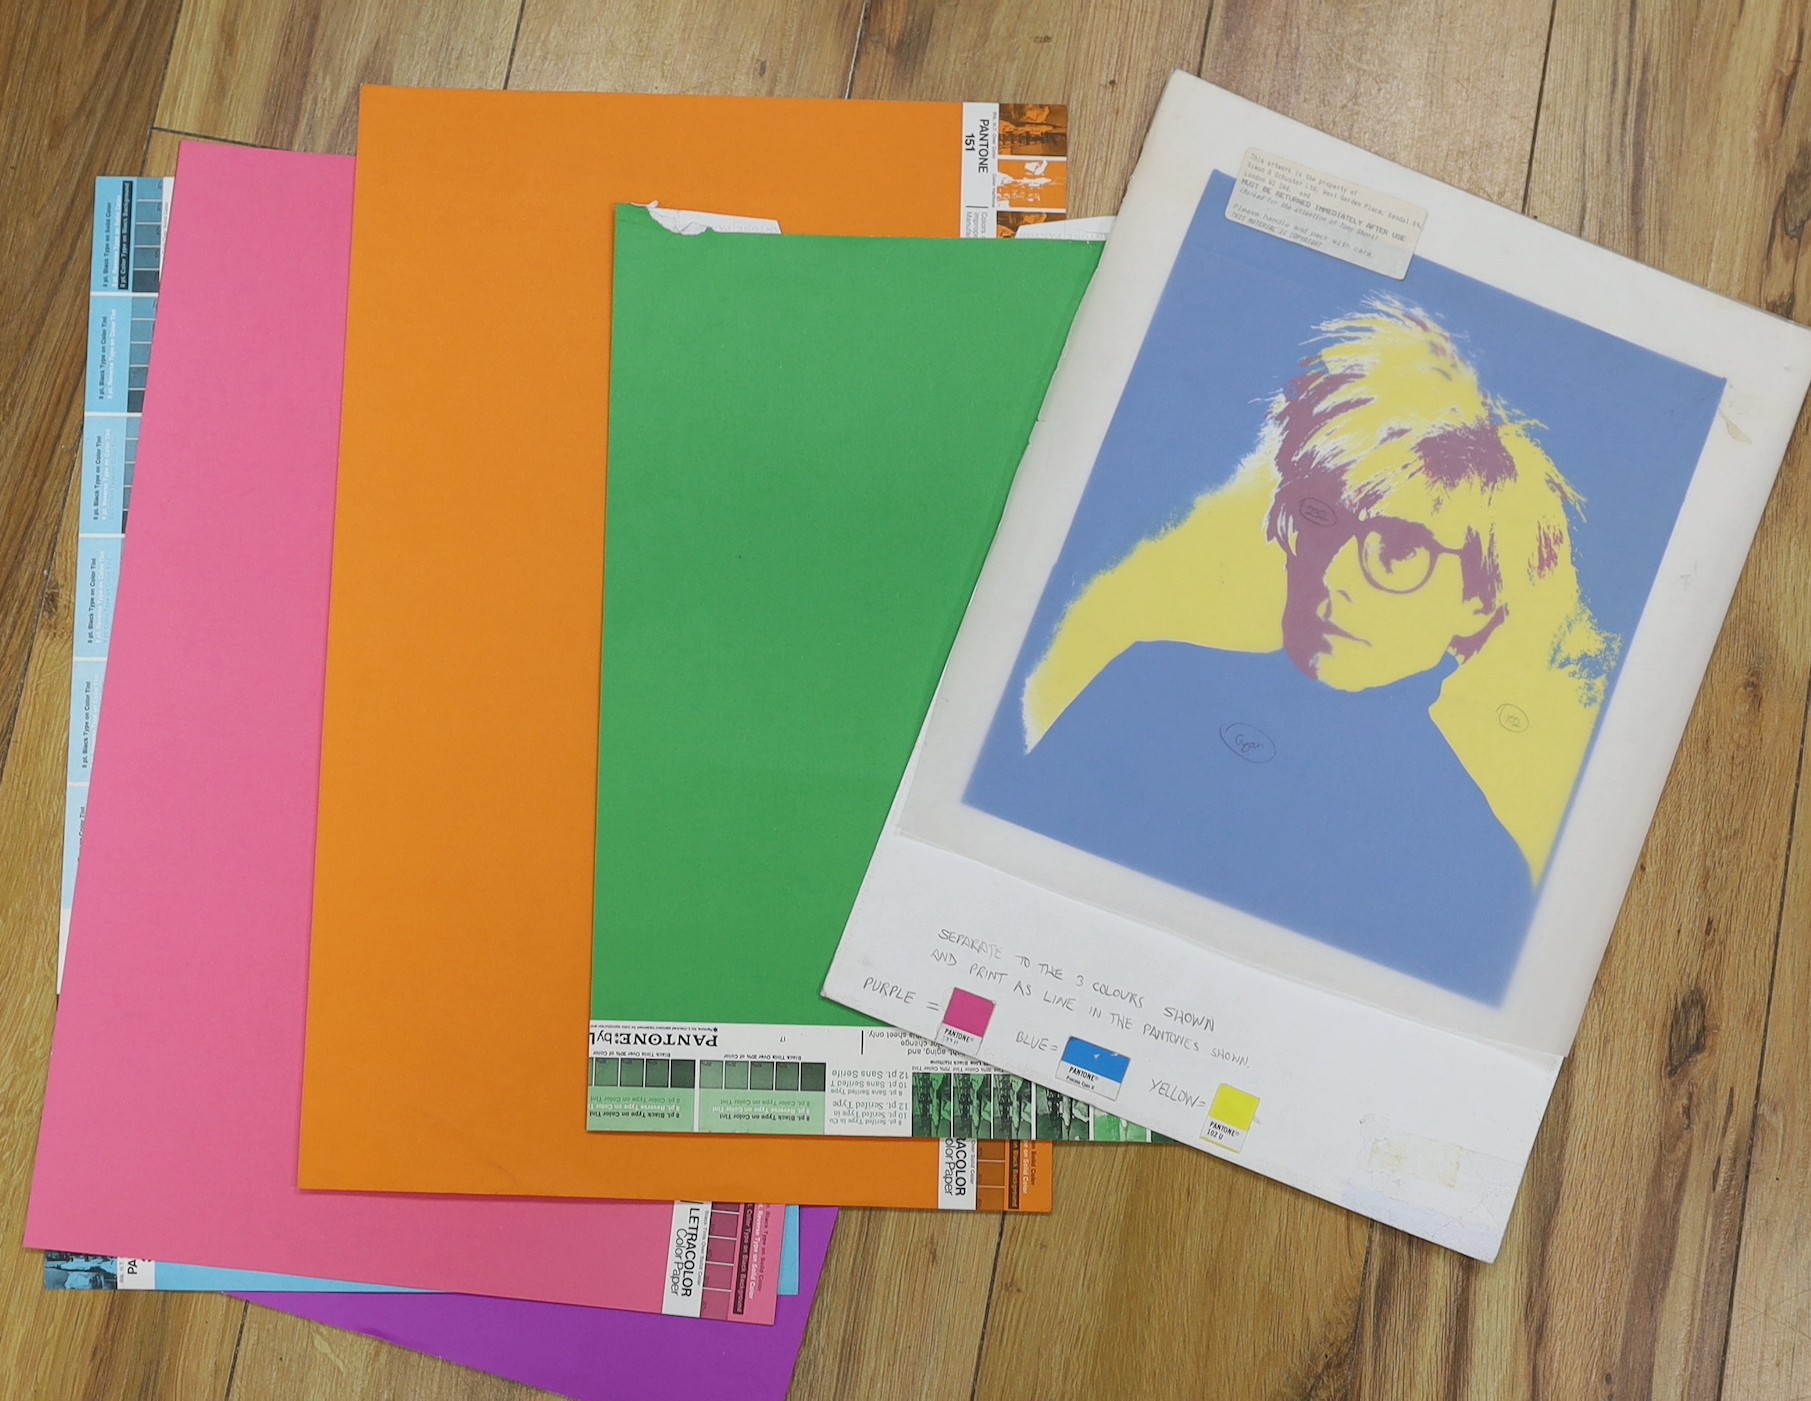 After Andy Warhol, screenprint, Portrait of the artist, book cover proof for his biography, 32 x 26cm, unframed                                                                                                             